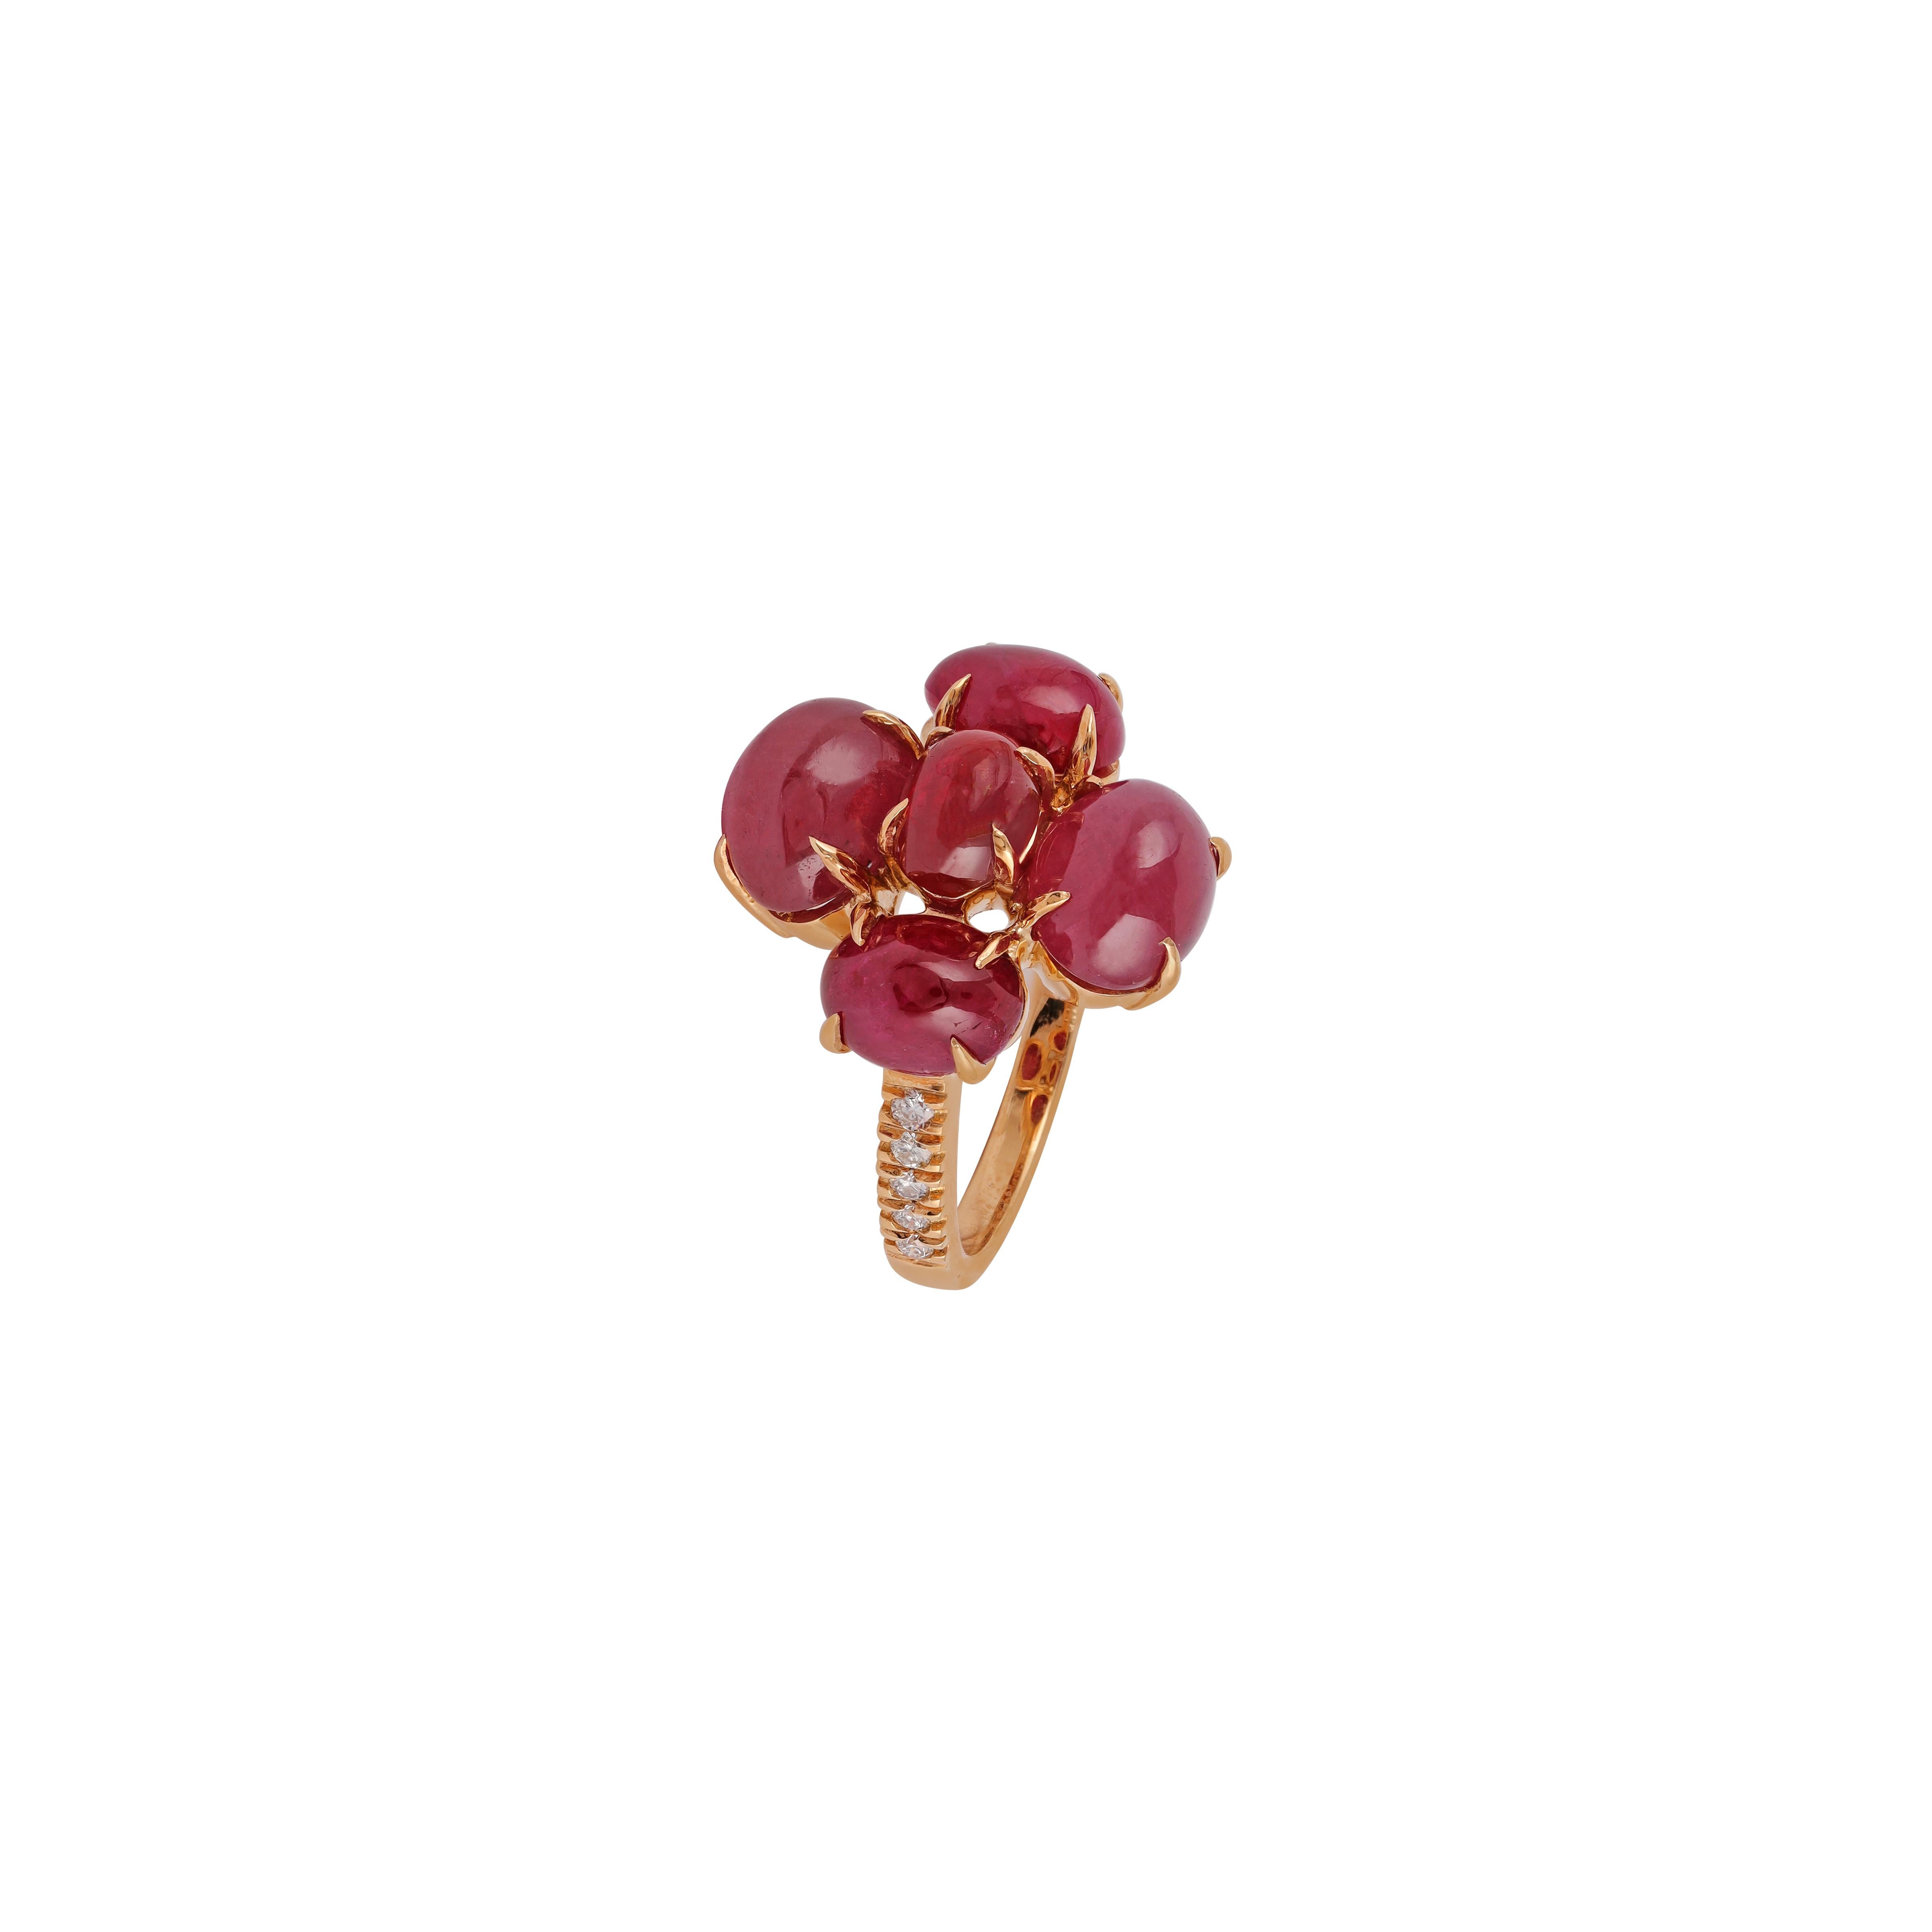  12.8ct Cabochon Burma Natural Ruby, Diamond Ring in Solid 18 Carat Yellow Gold In New Condition For Sale In Jaipur, Rajasthan